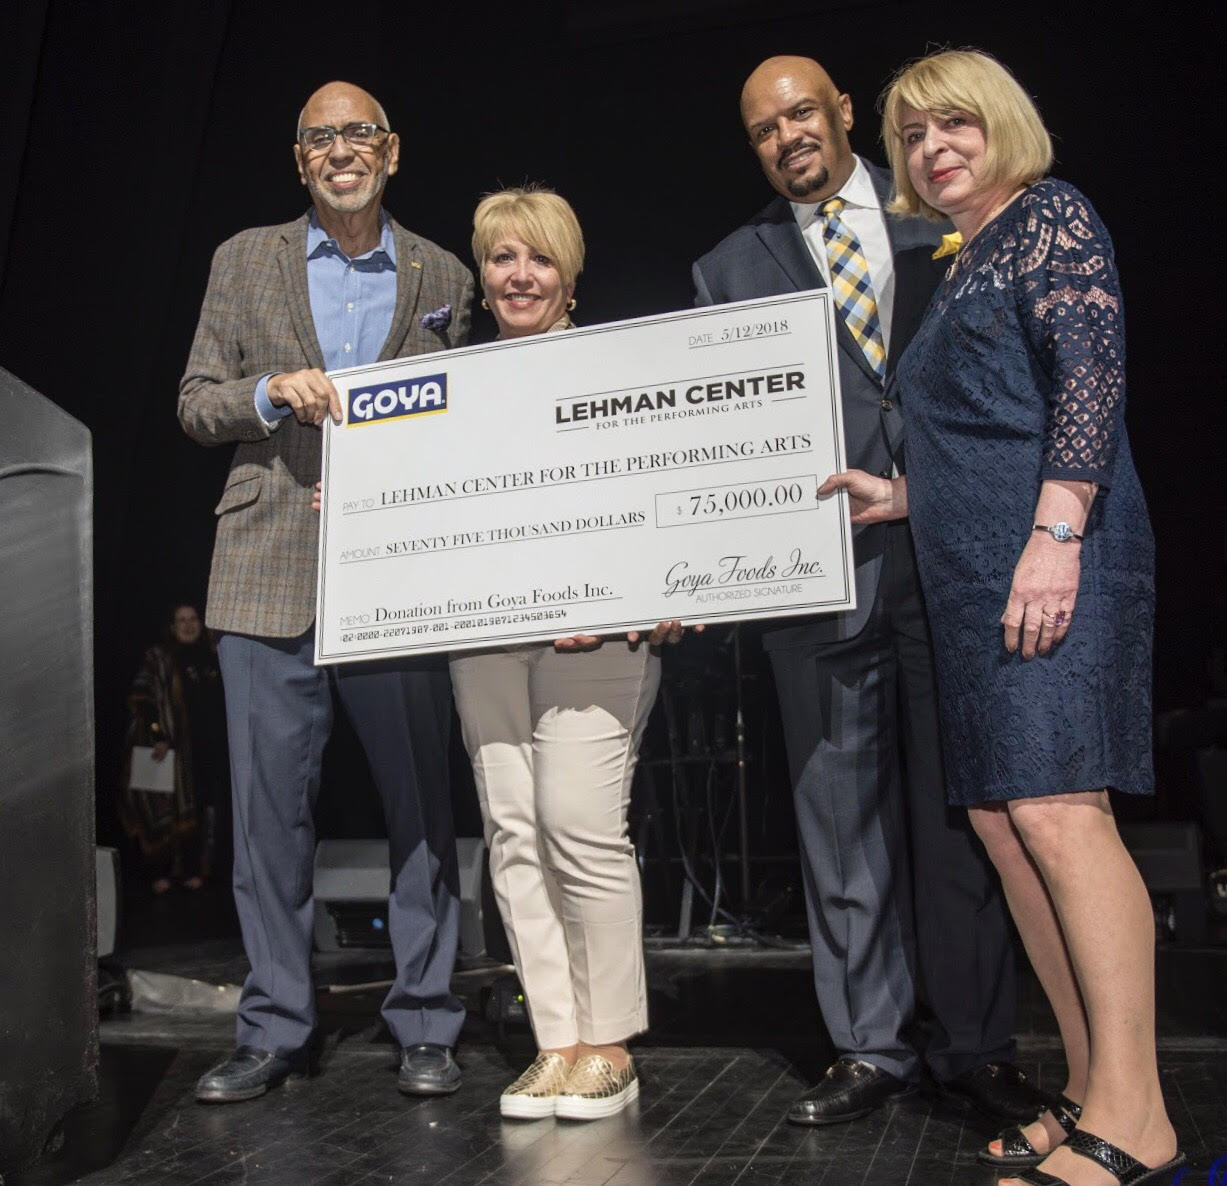 Press Release: GOYA FOODS PRESENTS $75,000 CHECK TO SUPPORT  THE LATINO CONCERT SERIES AT LEHMAN CENTER FOR THE PERFORMING ARTS AND DONATES 2,800 POUNDS OF FOOD TO FOOD PANTRY OF LEHMAN COLLEGE